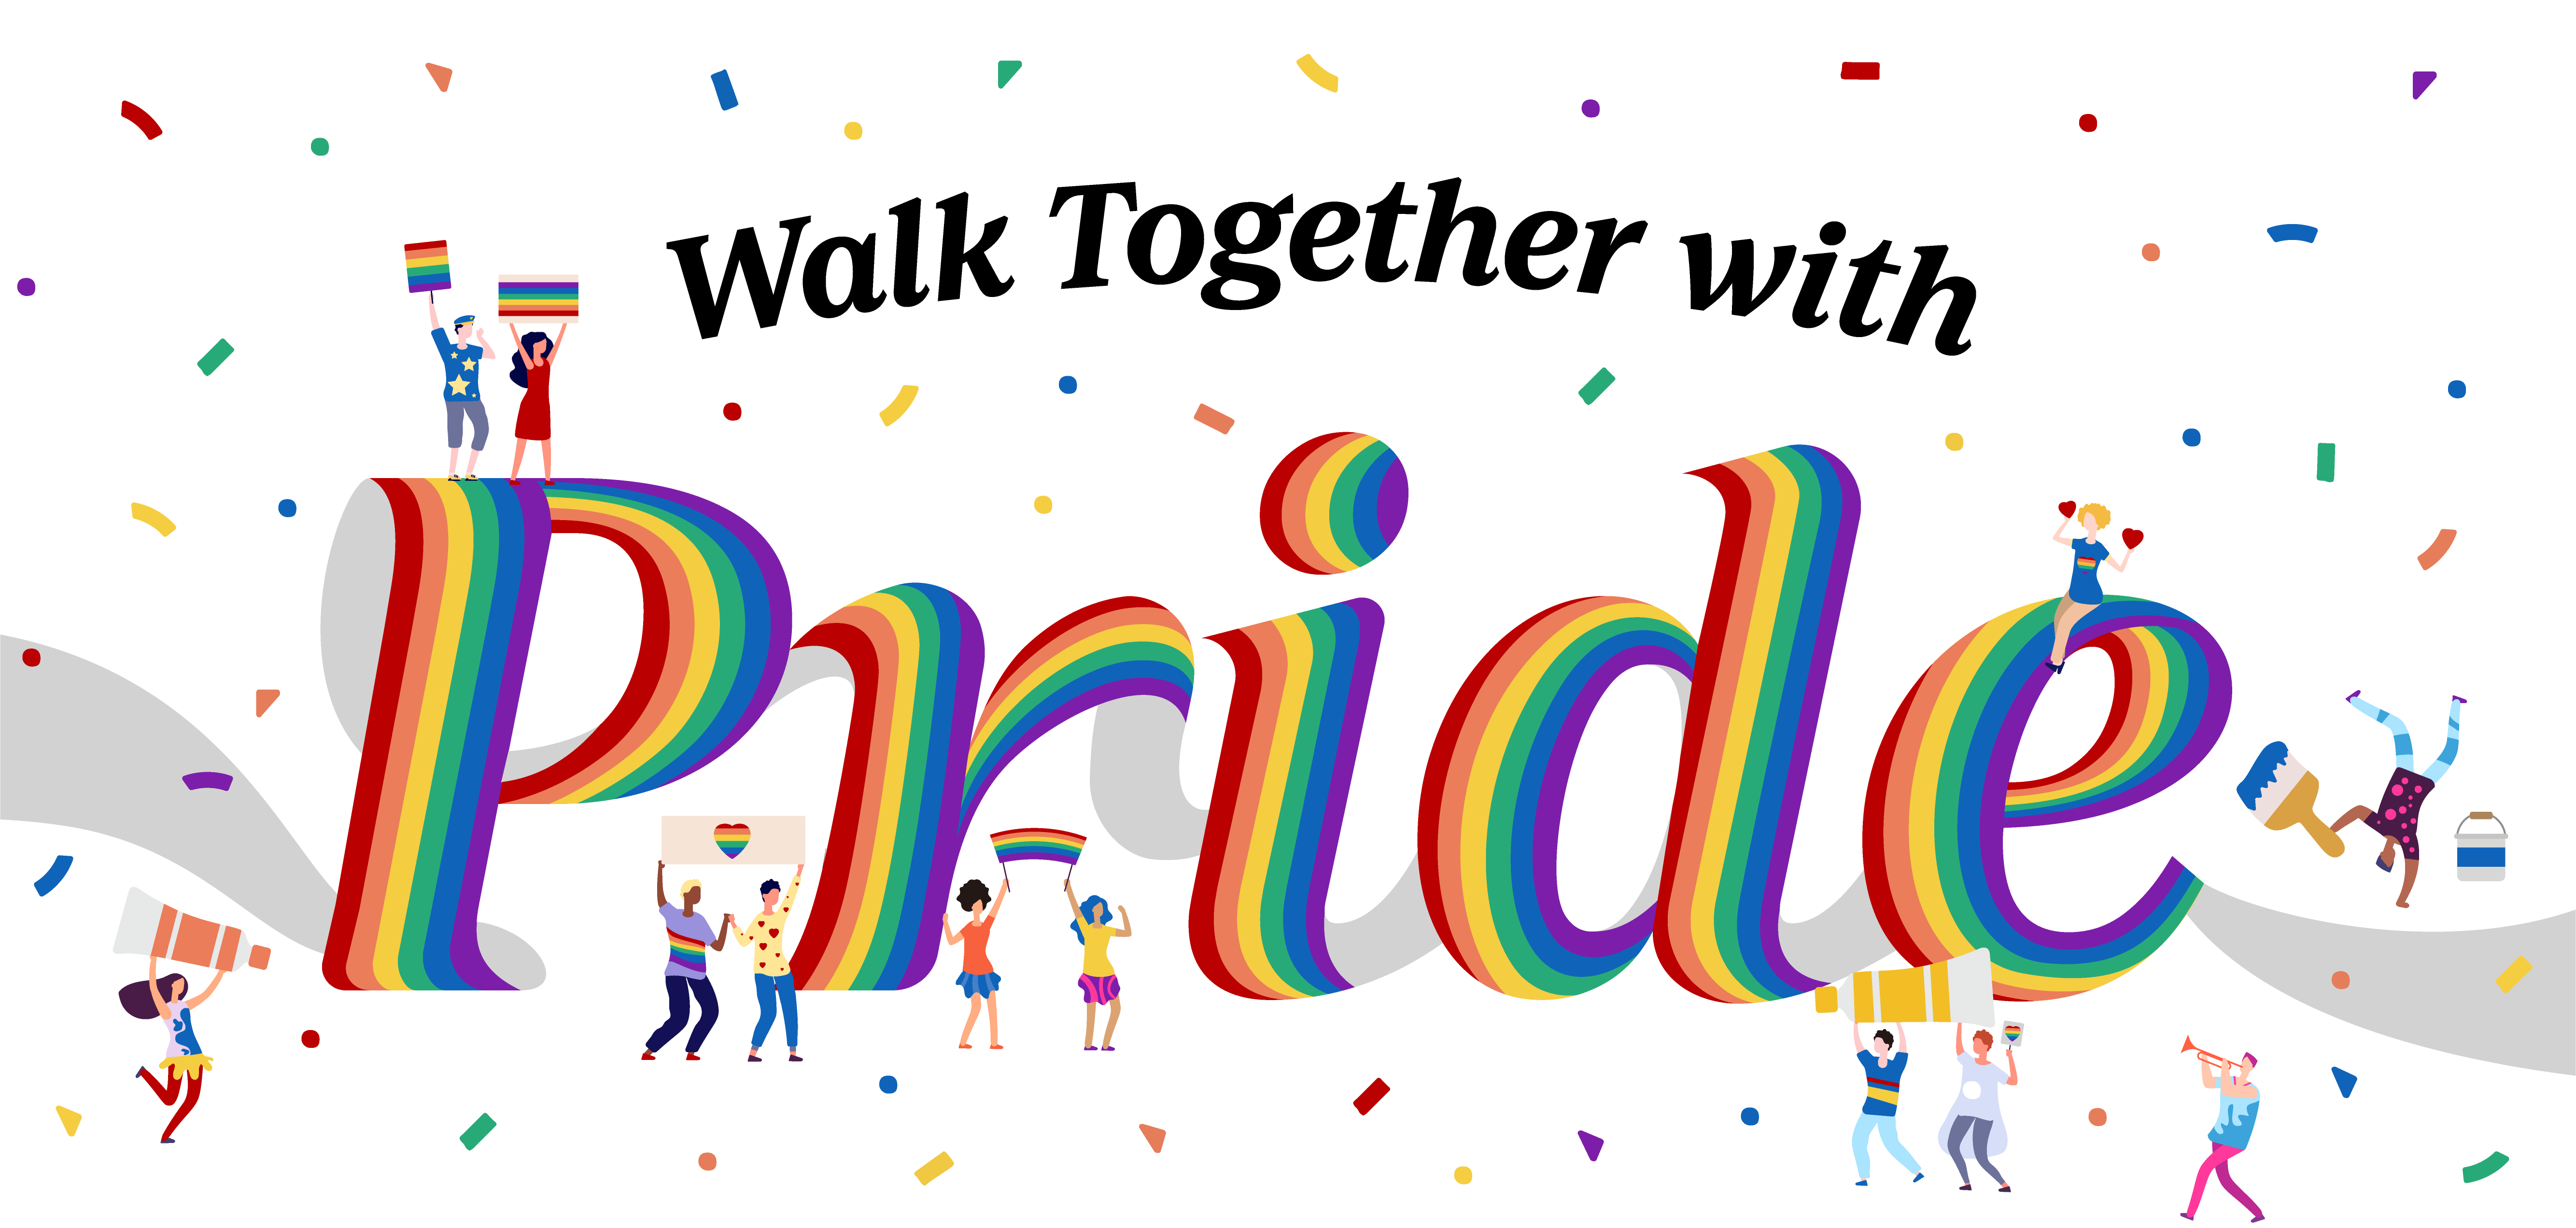 Walk Together with Pride